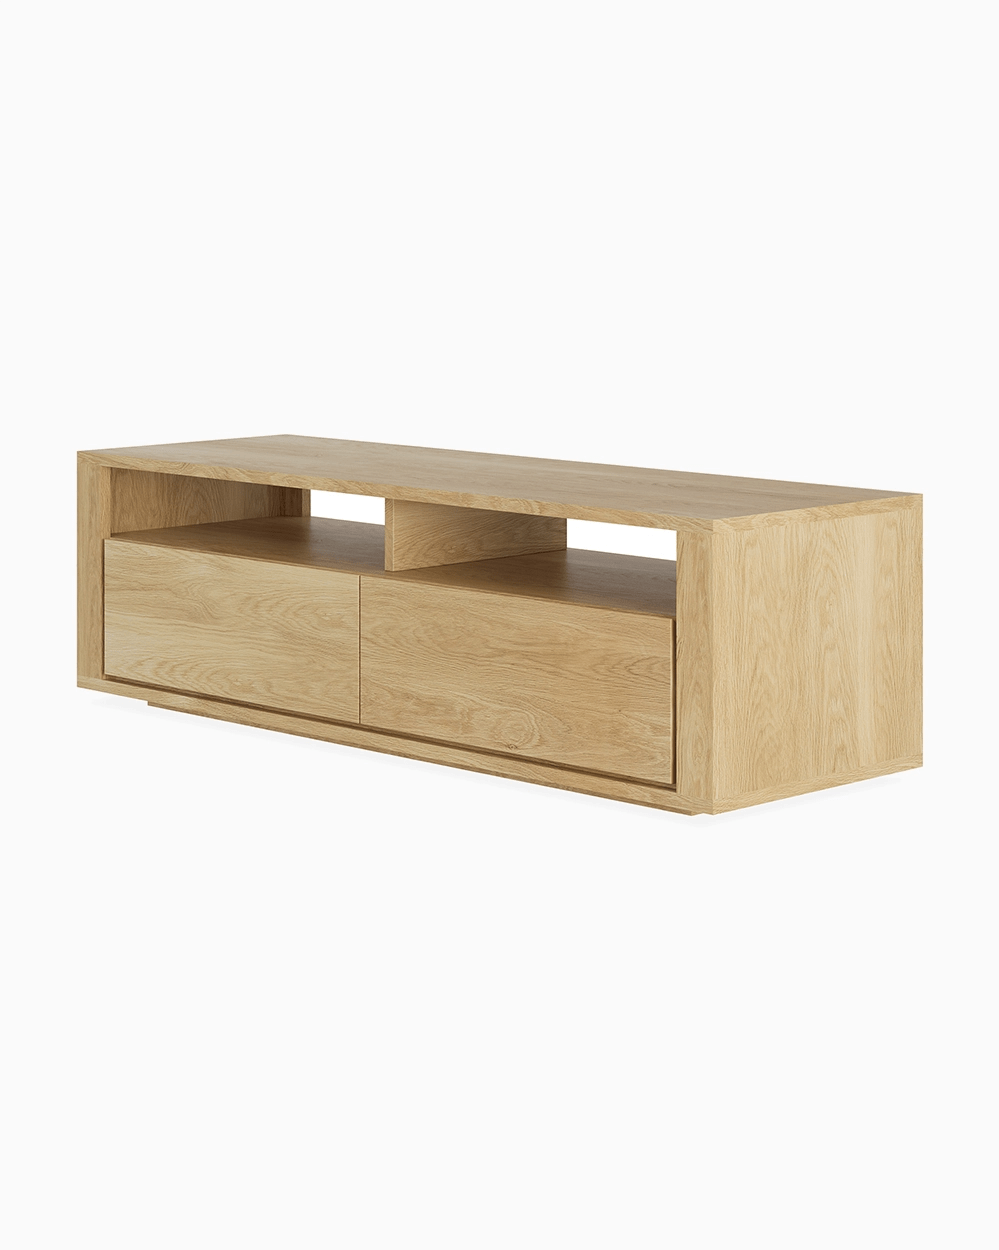 Natural Oak / Two drawers (55.5")